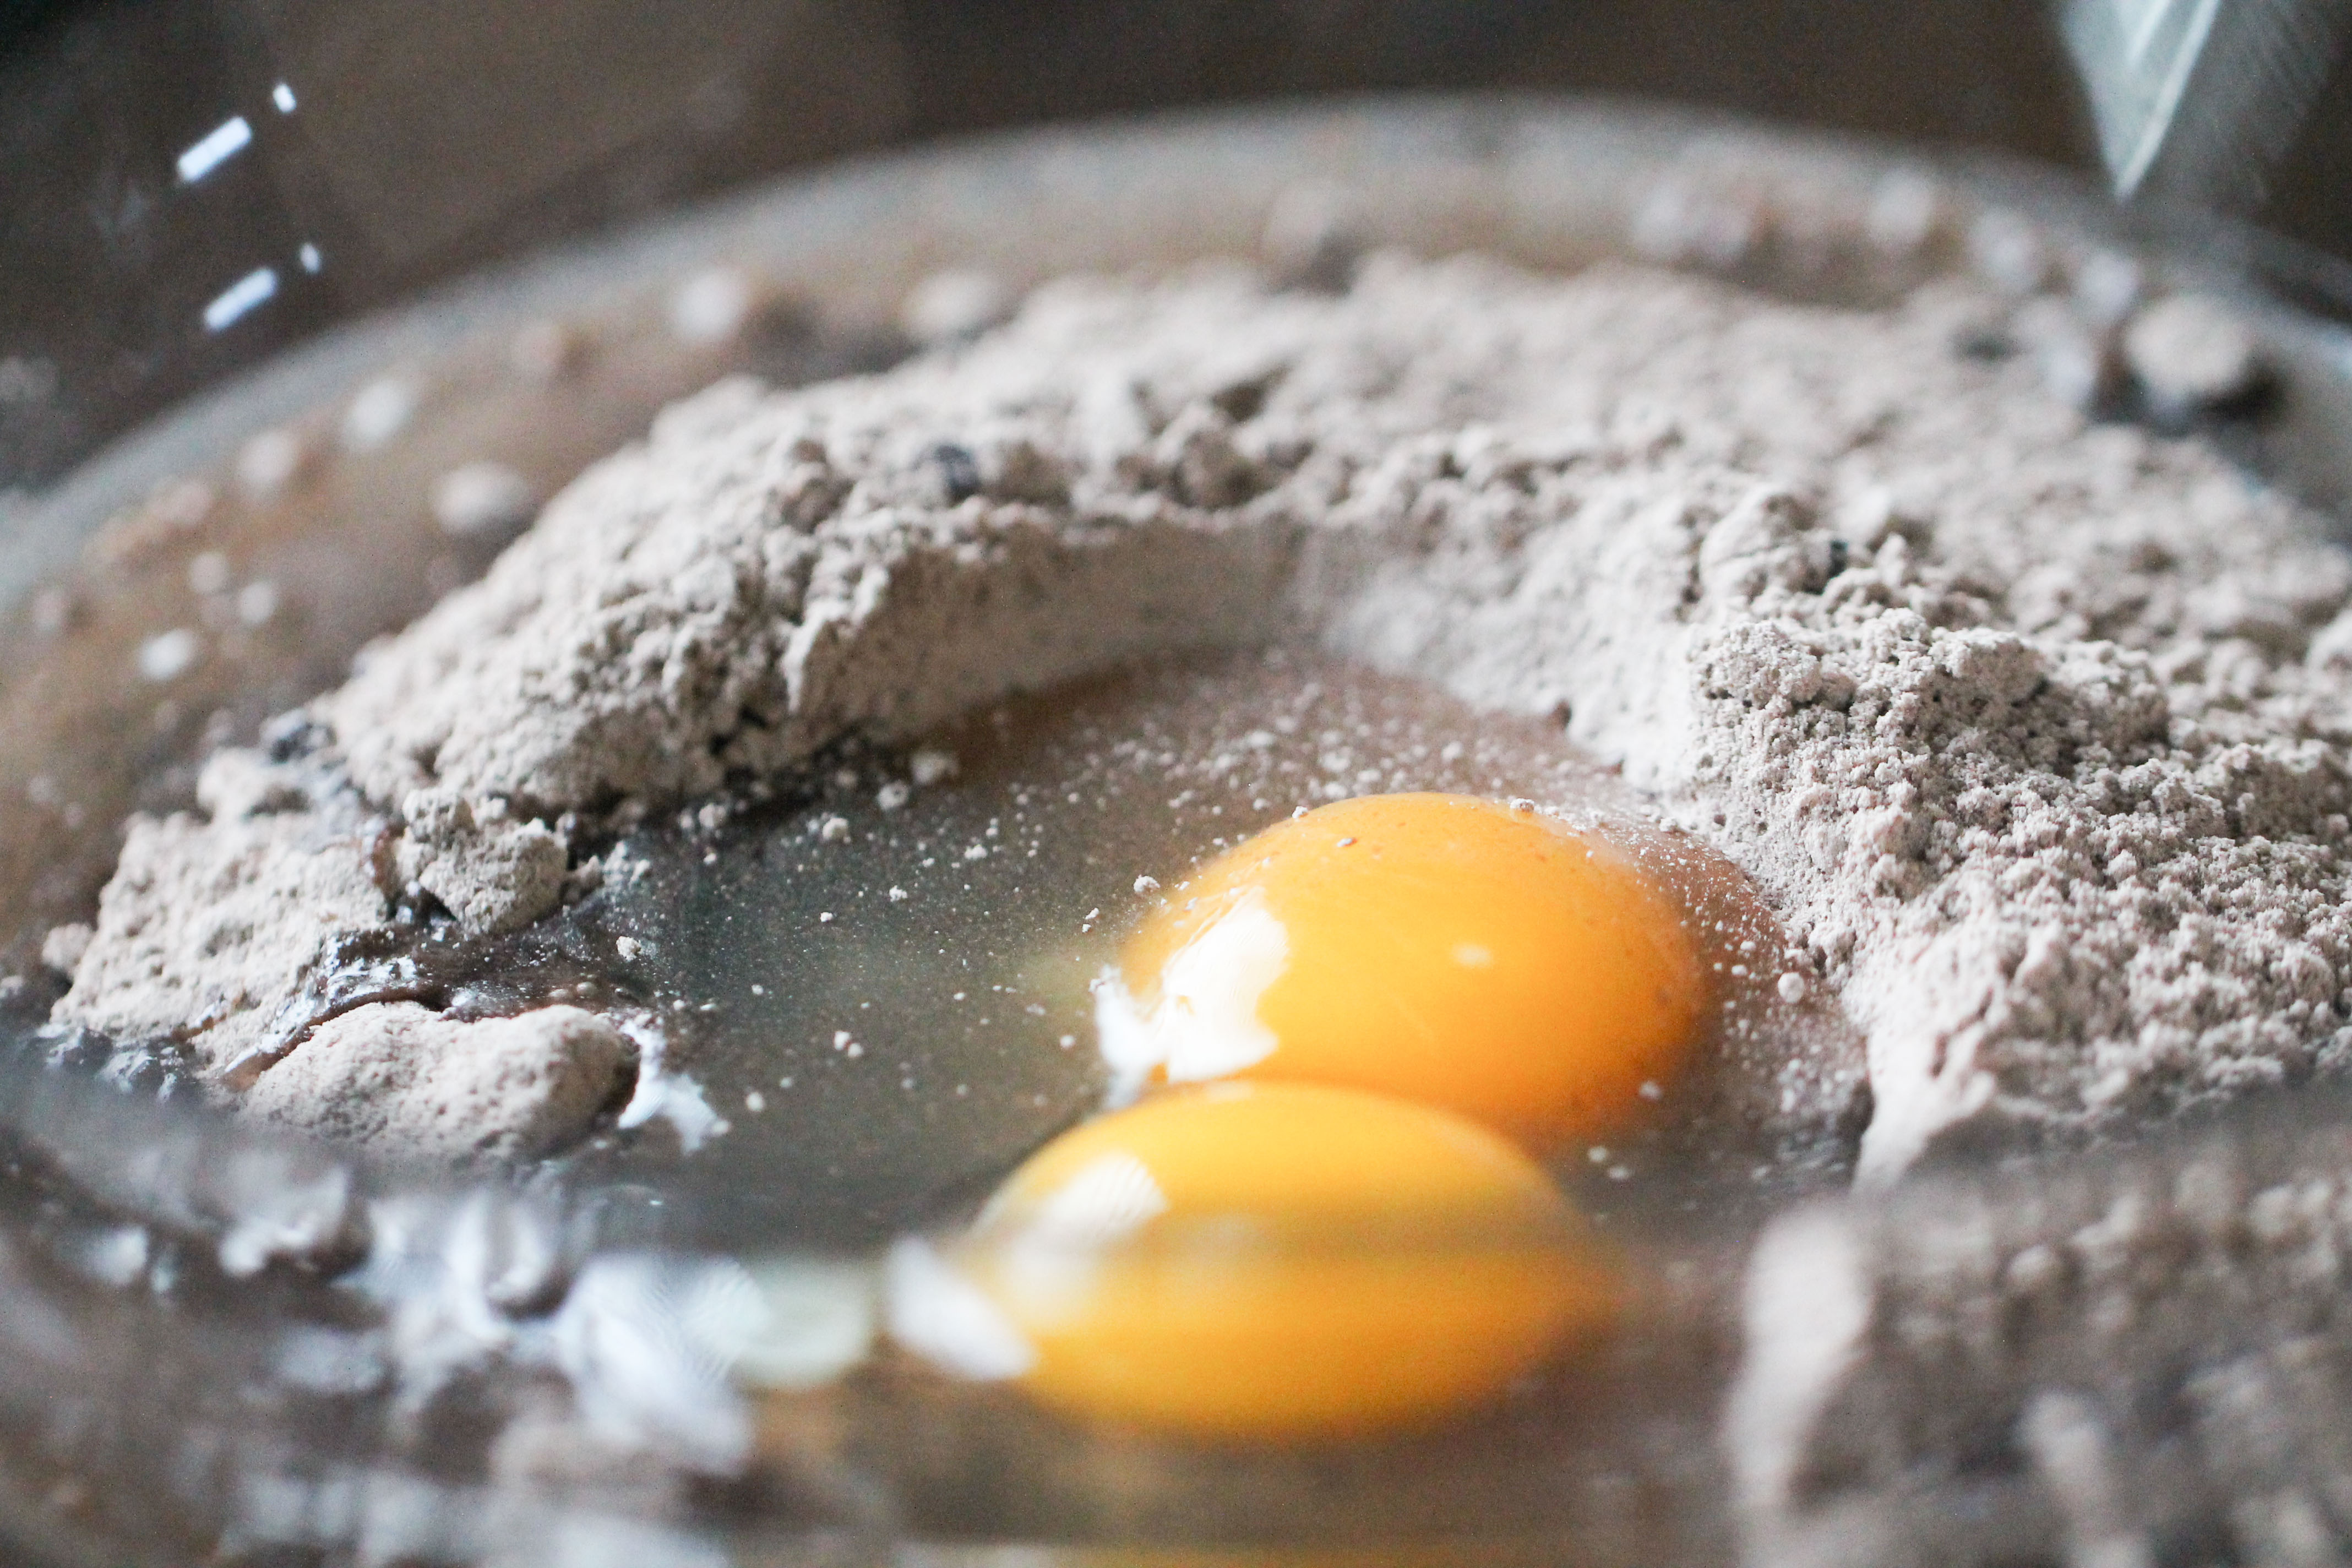 dry cake mix and eggs in a mixing bowl